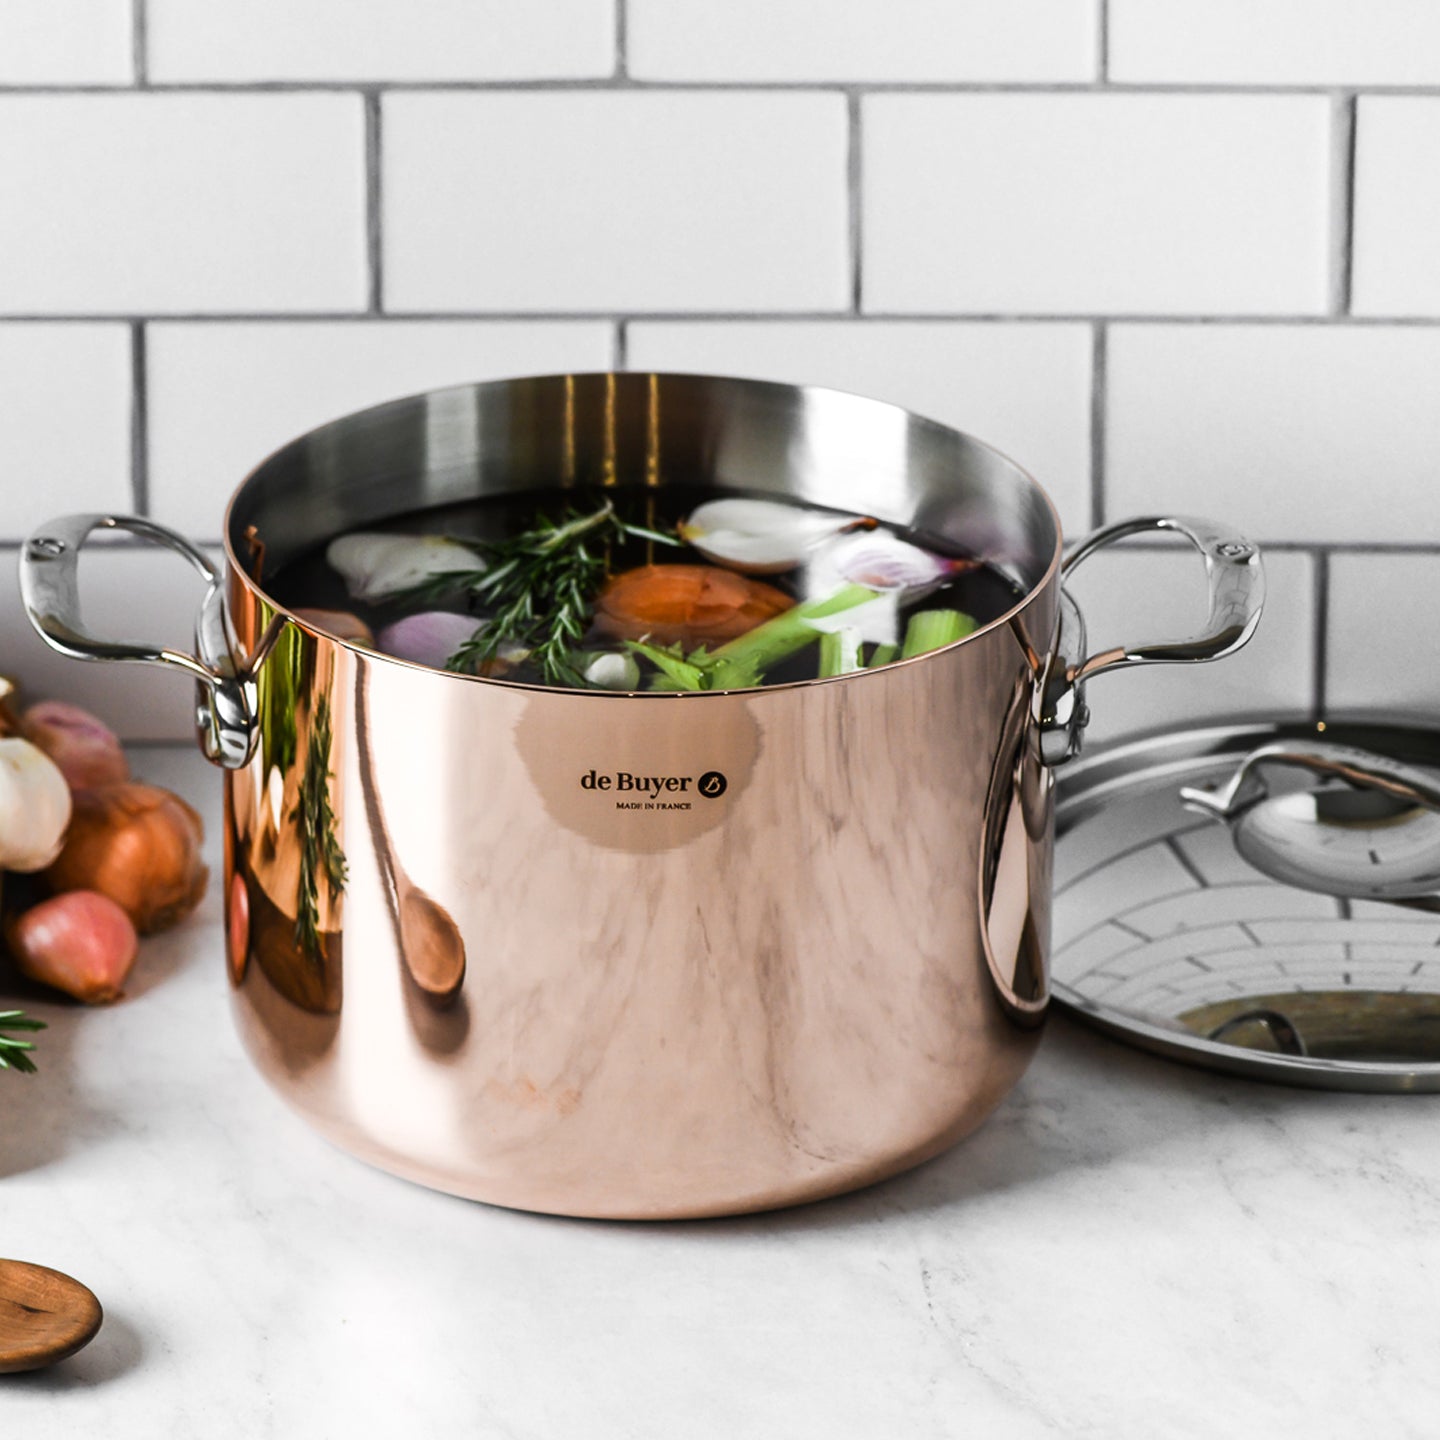 De Buyer Prima Matera SS Induction Stewpan/Stockpot with Lid